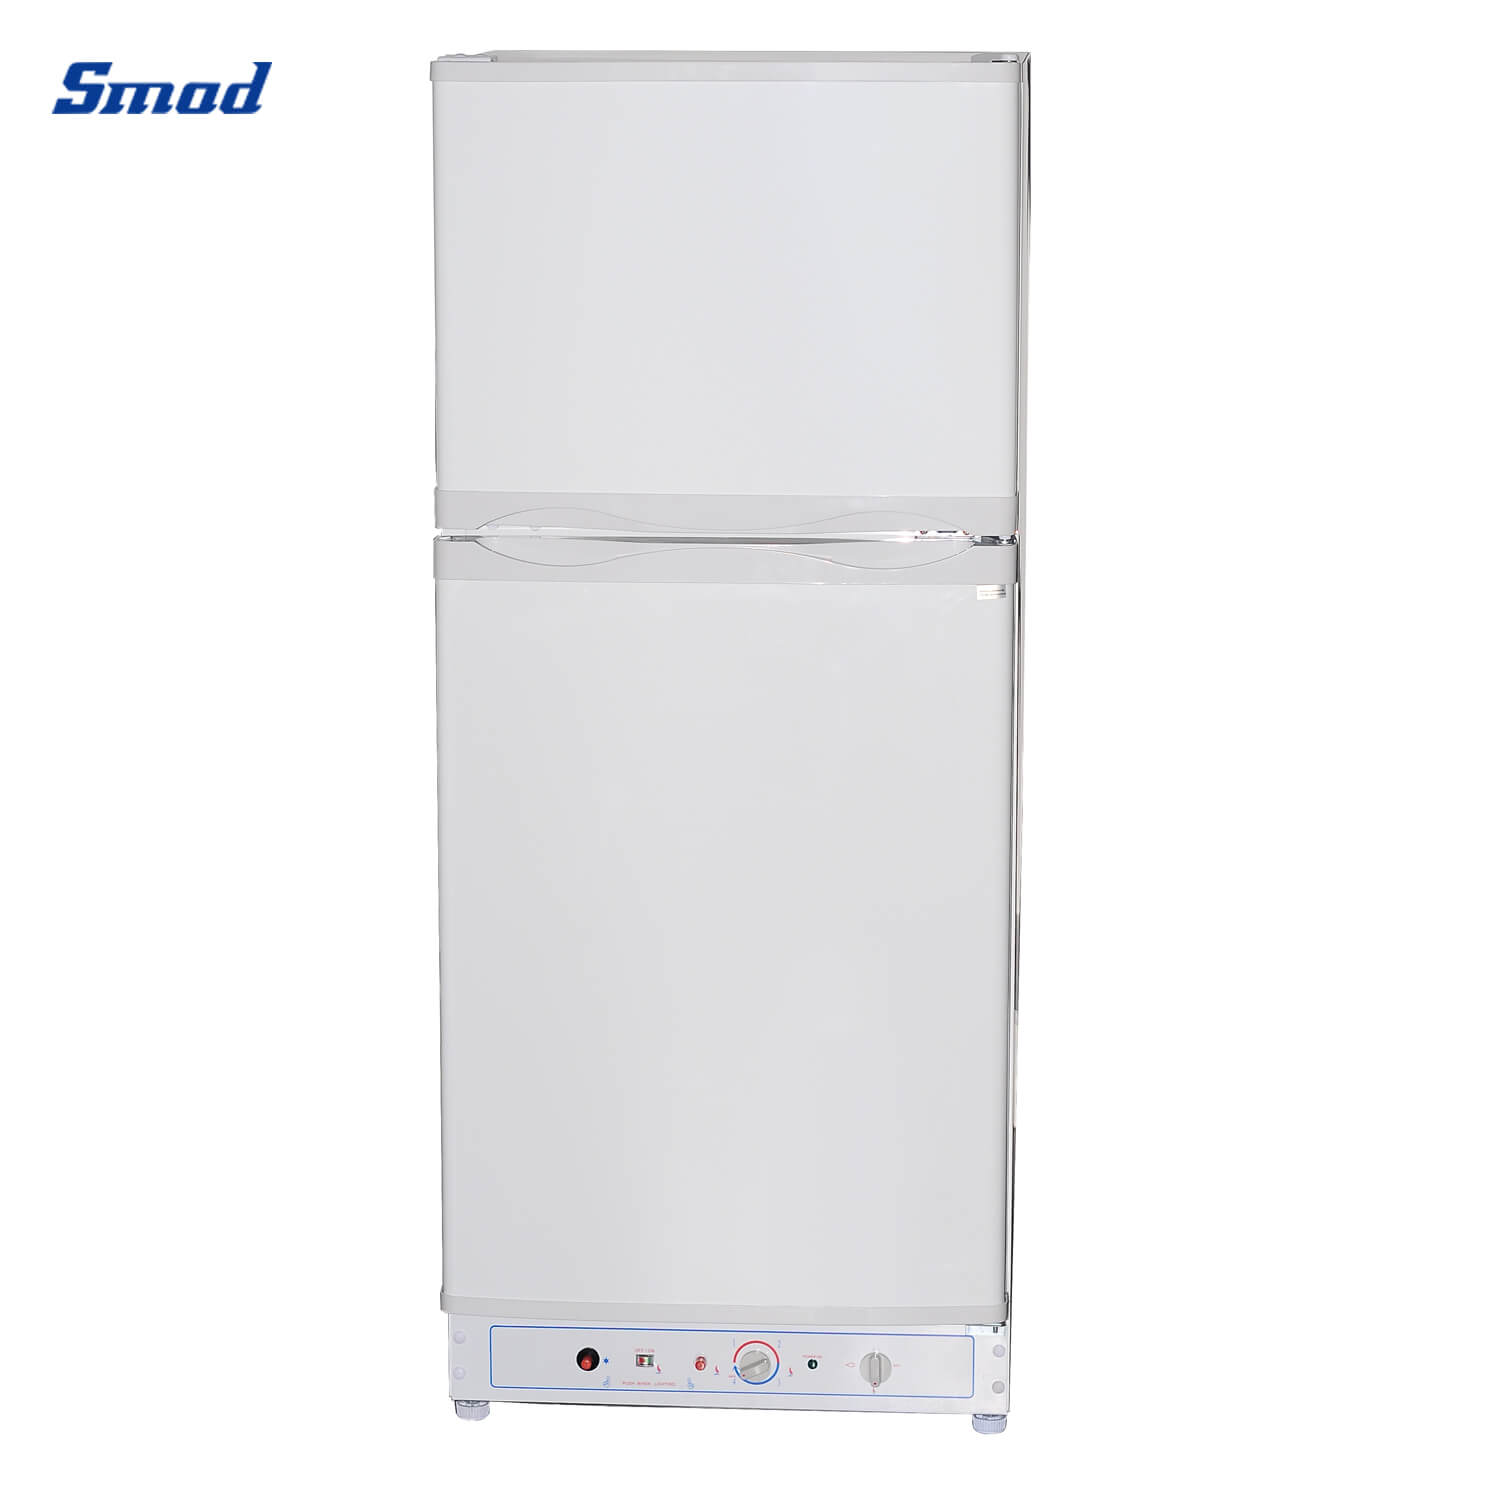 
Smad Gas / Absorption Double Door Refrigerator with no noise